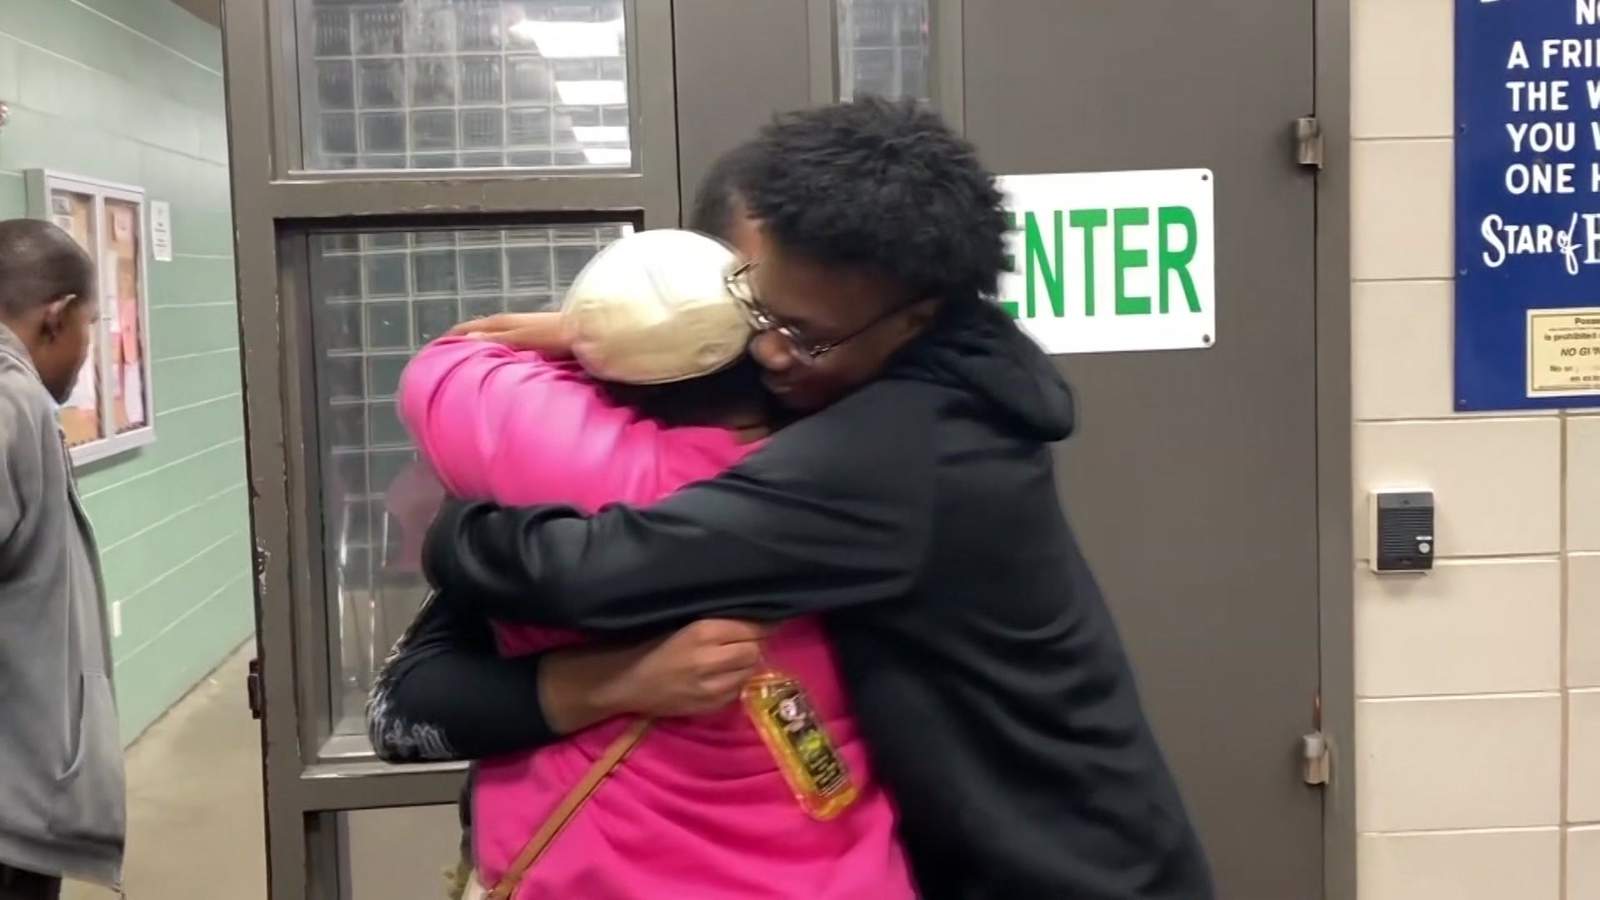 WATCH: Man with autism reunites with family after he went missing for two days